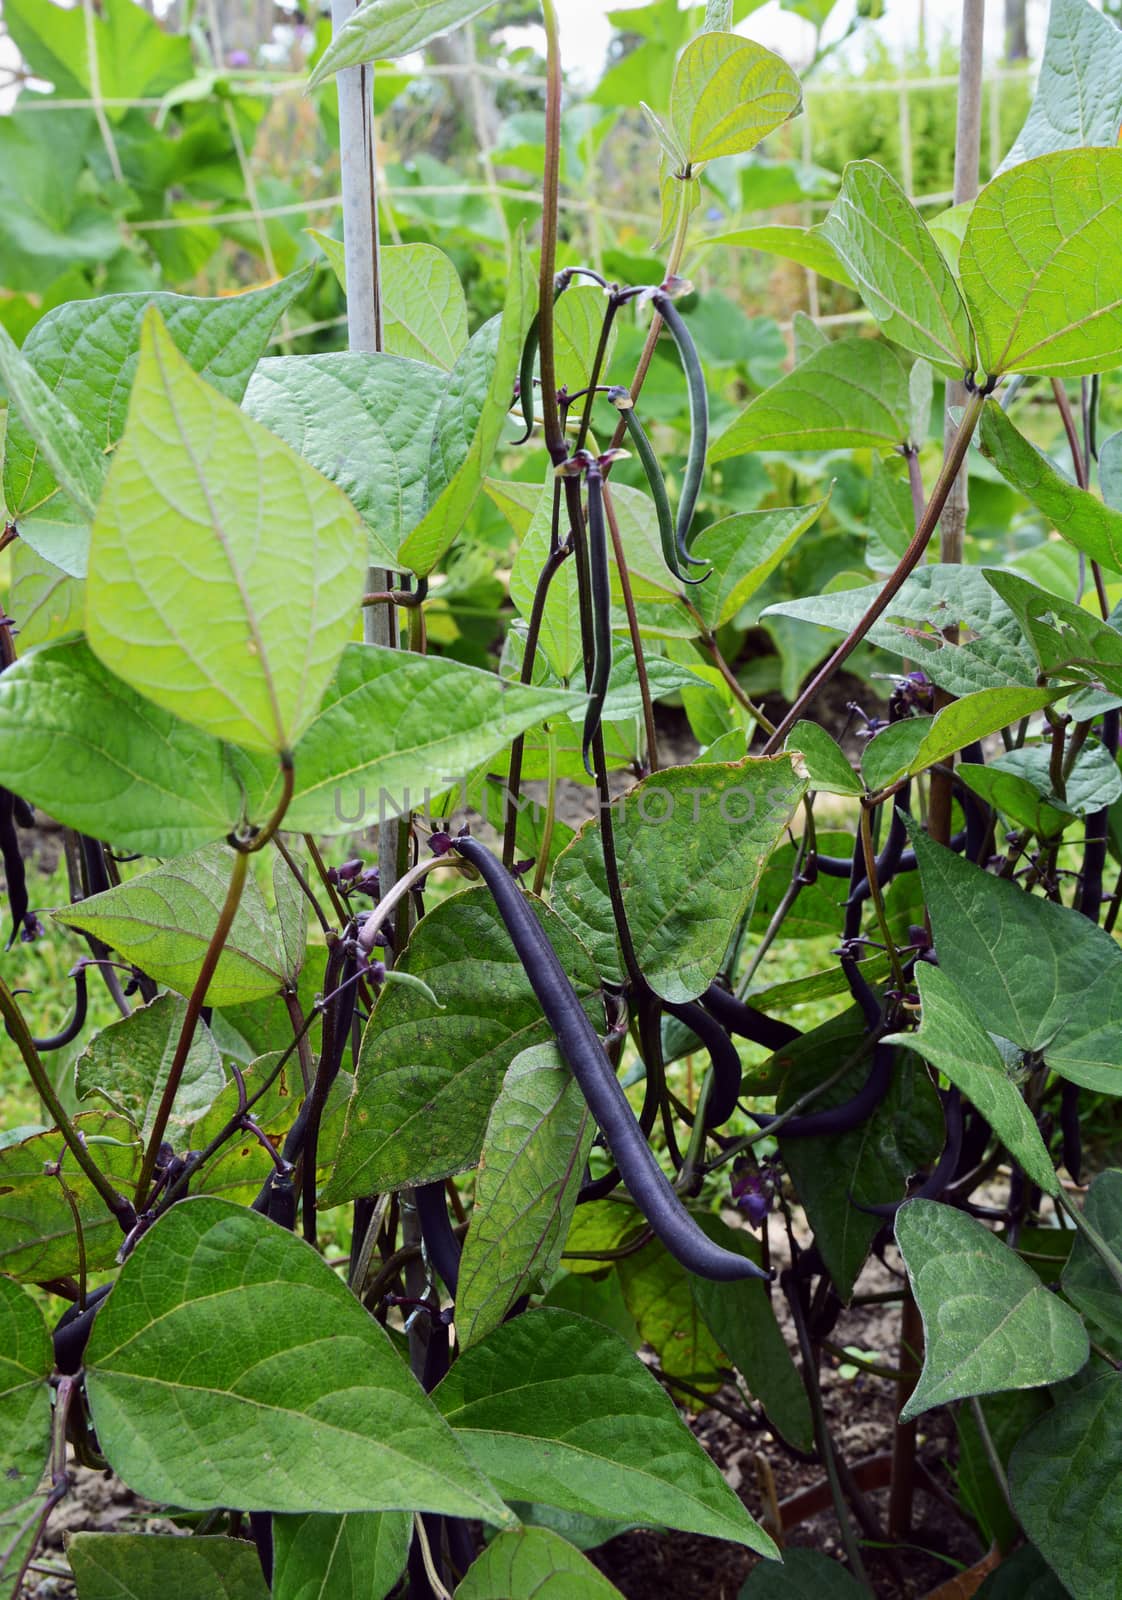 Dwarf French beans with dark purple pods grow on bushy green plants in an allotment garden